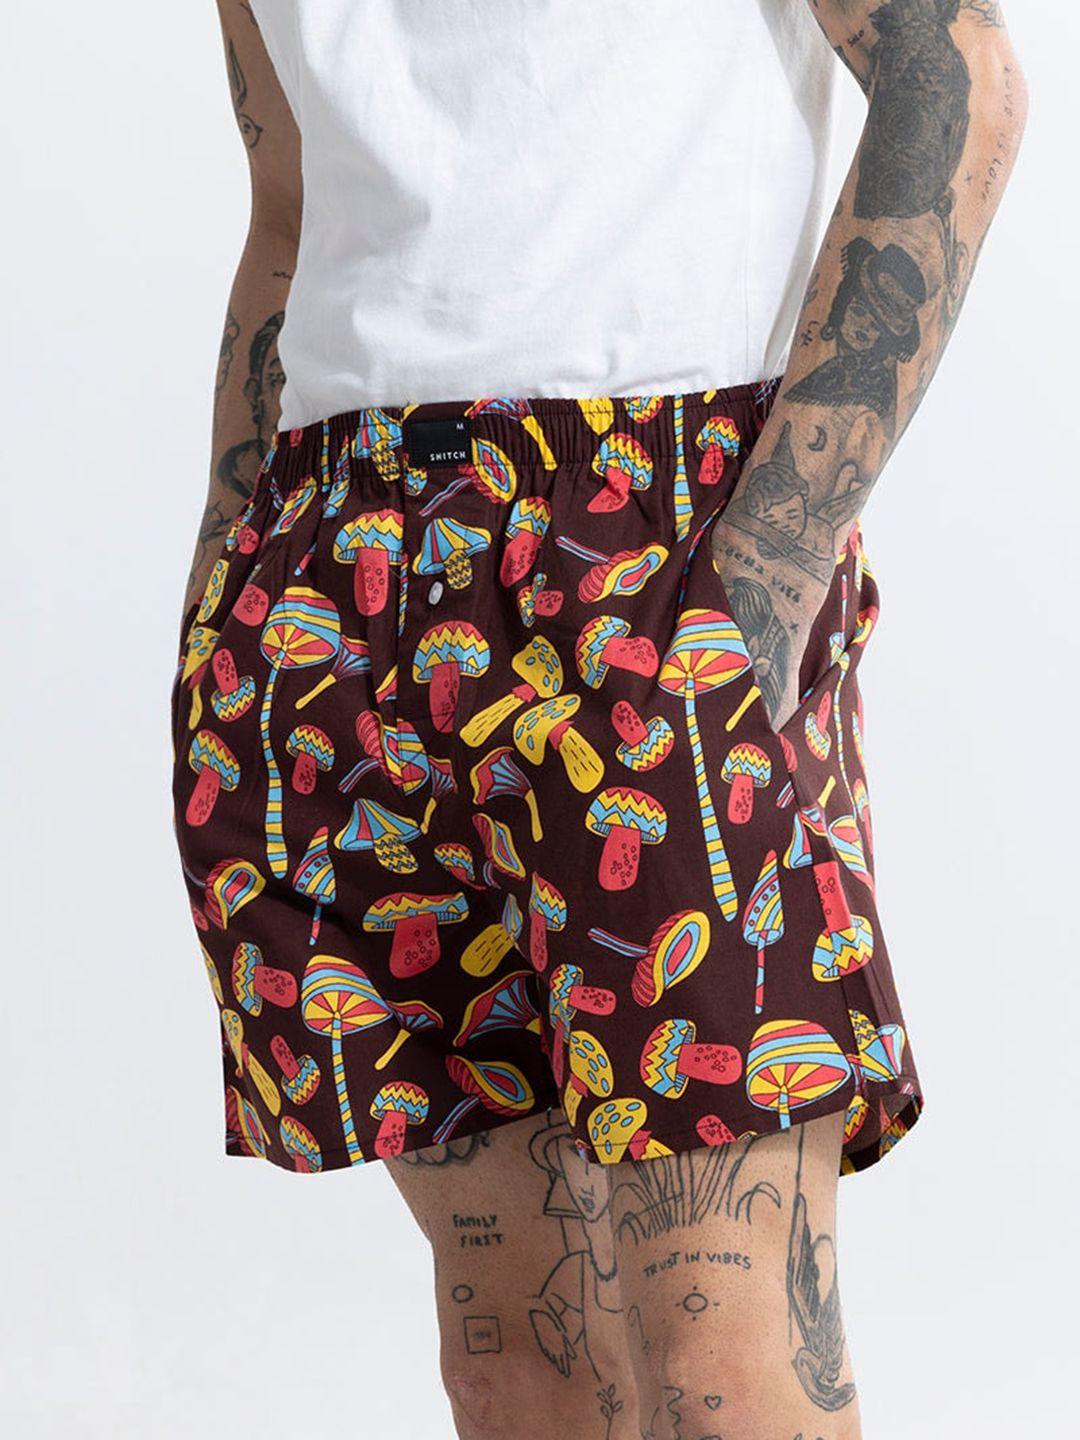 snitch-brown-printed-pure-cotton-boxers-4msbx9229-02-s